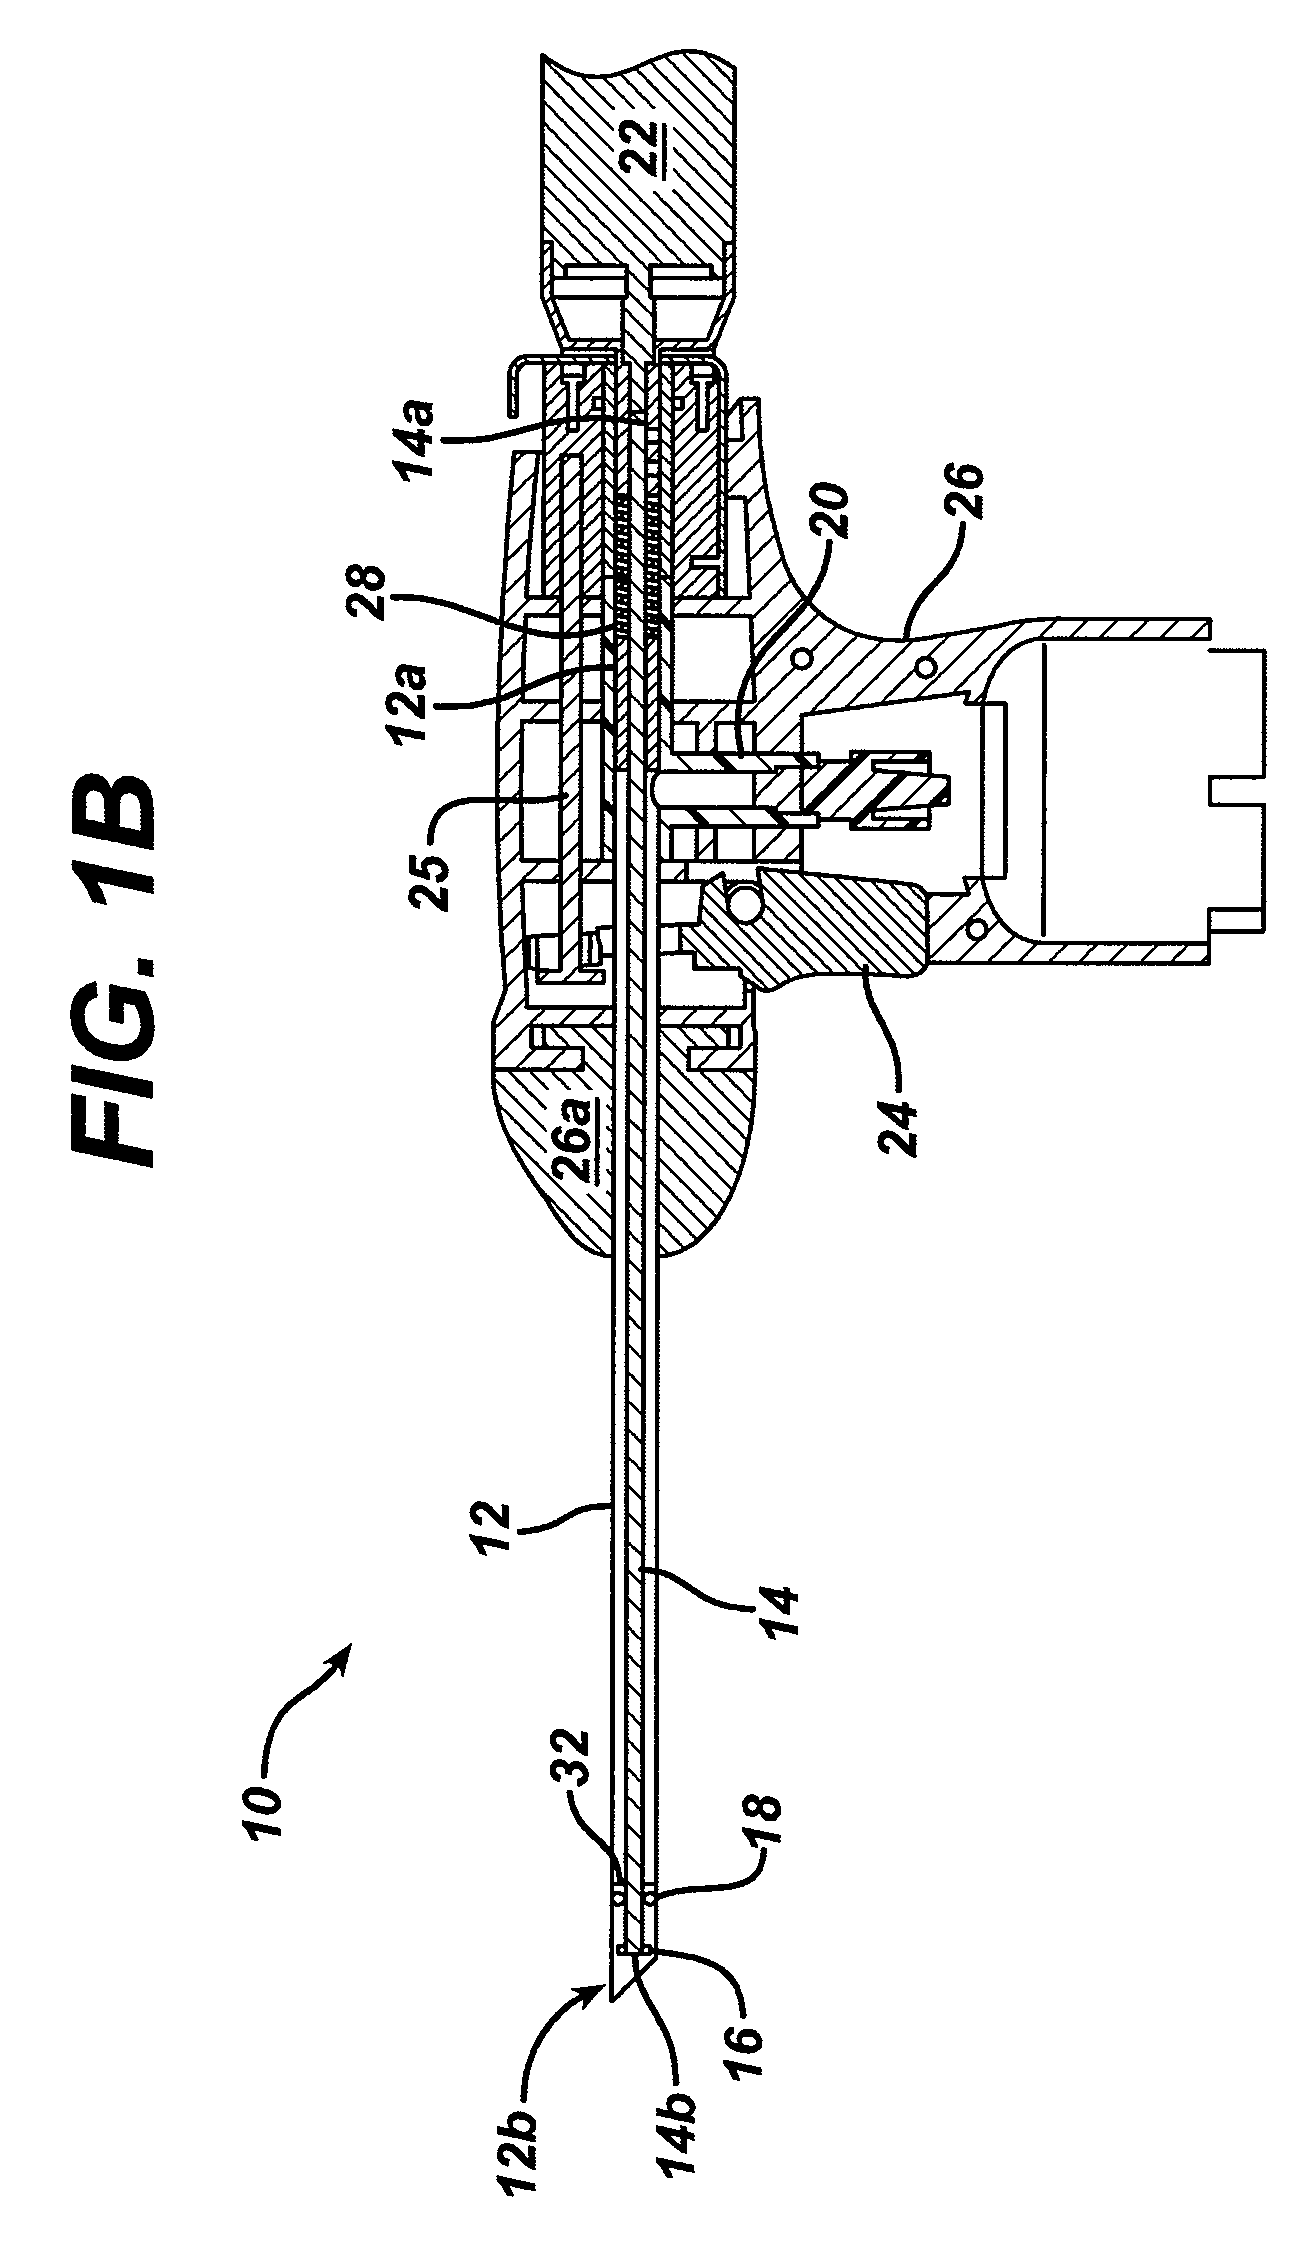 Tissue extraction and maceration device